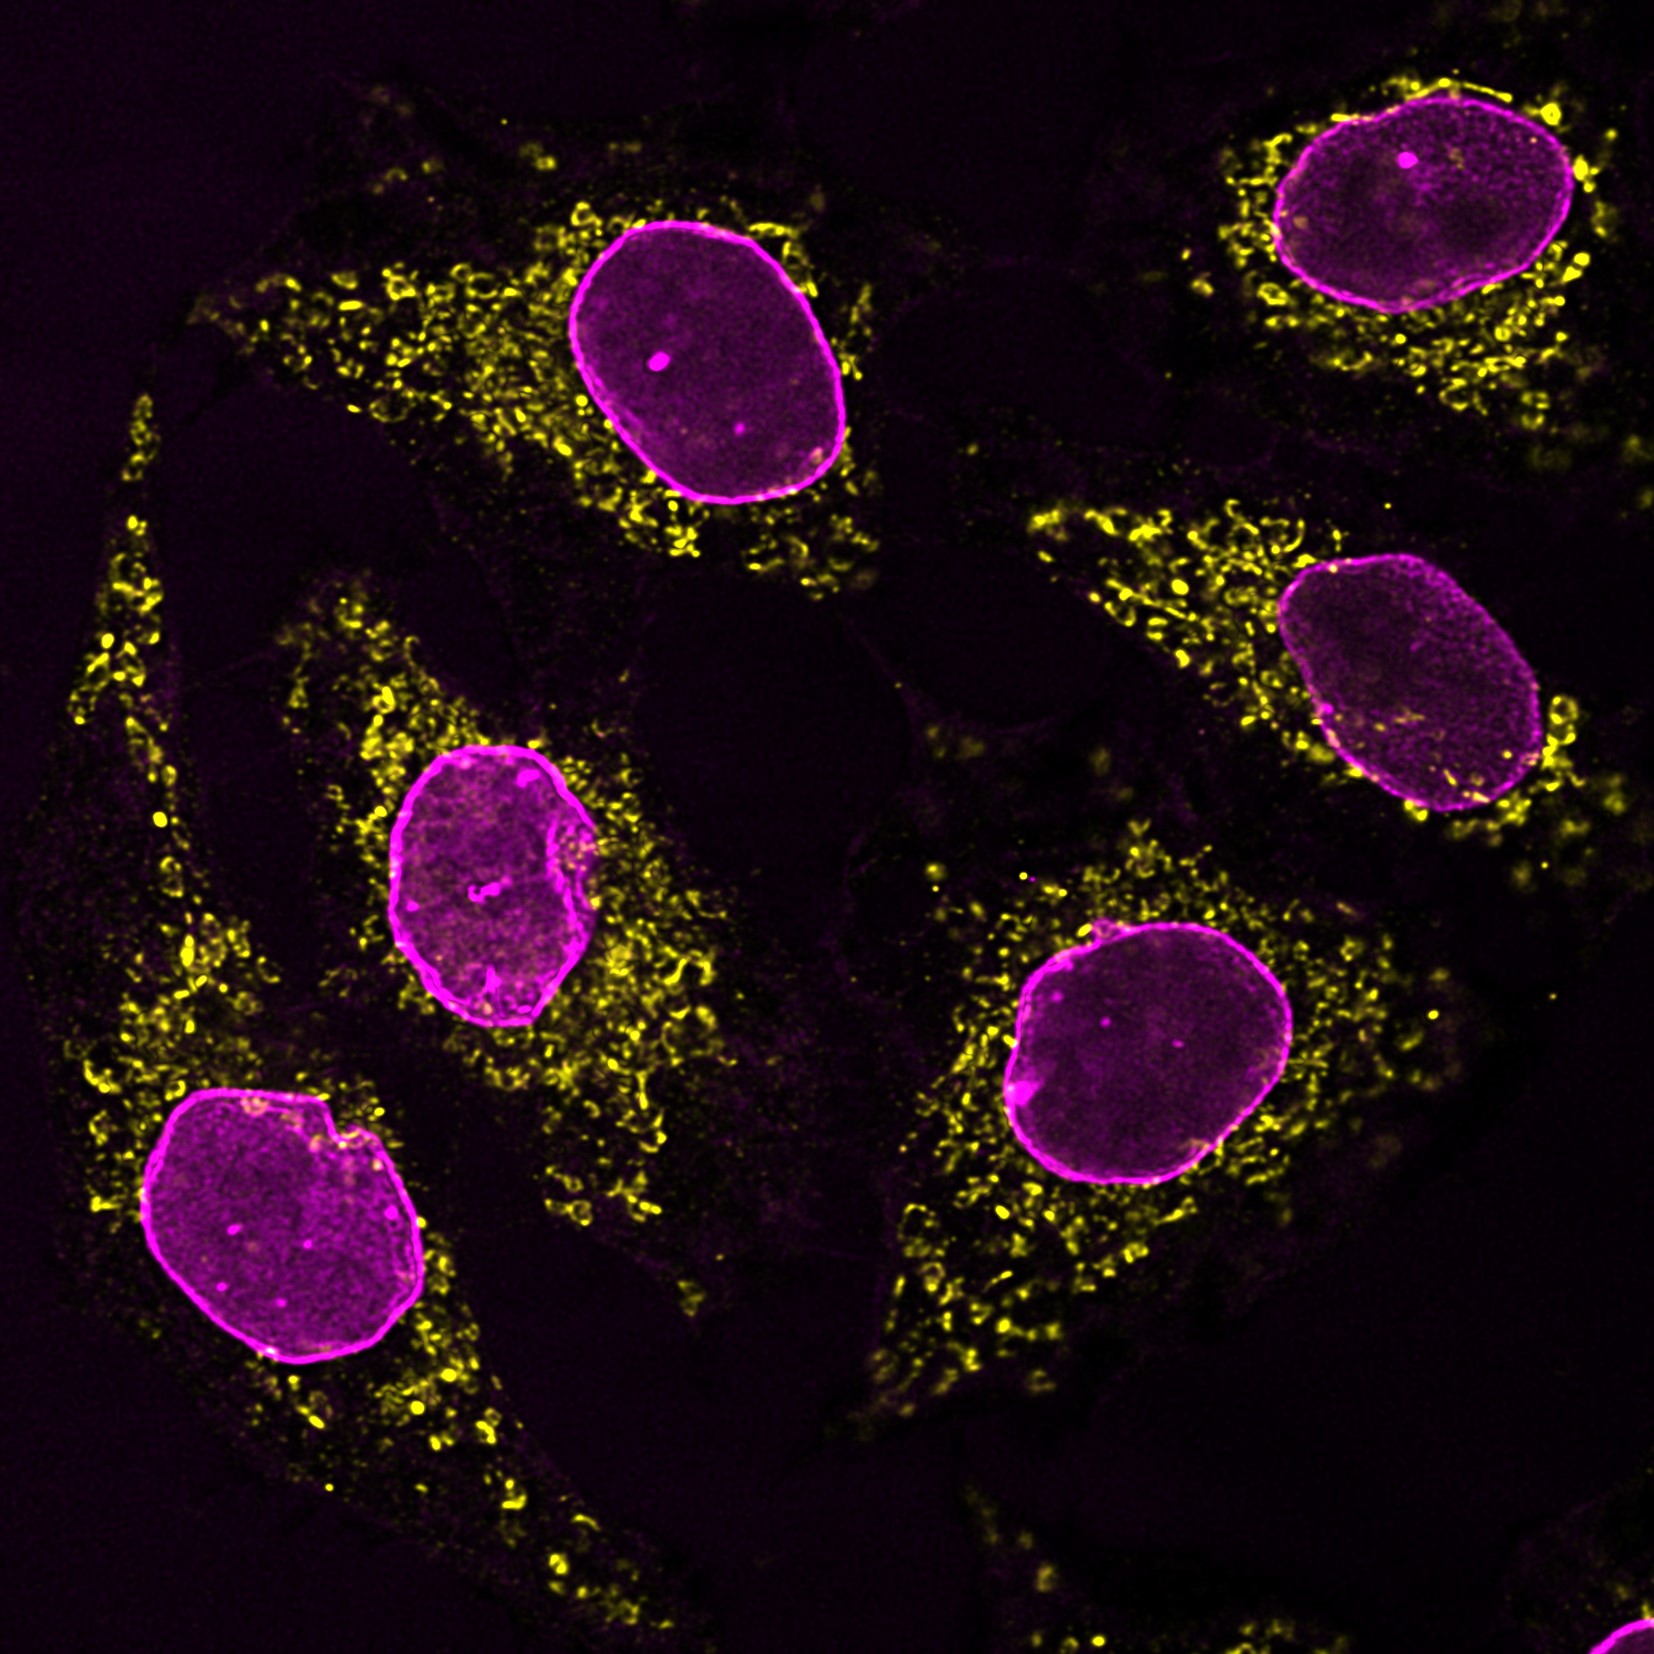 Immunofluorescence analysis of HeLa cells co-stained with mouse IgG1 anti-HSP60 antibody (66041-1-Ig) and mouse IgG2b anti-Lamin A/C antibody followed by Nano-Secondary® alpaca anti-mouse IgG1, recombinant VHH, CoraLite® Plus 555 (smsG1CL555-1, yellow) and Nano-Secondary® alpaca anti-mouse IgG2b, recombinant VHH, CoraLite® Plus 647 (smsG1CL647-1, magenta). Images were recorded at the Core Facility Bioimaging at the Biomedical Center, LMU Munich.